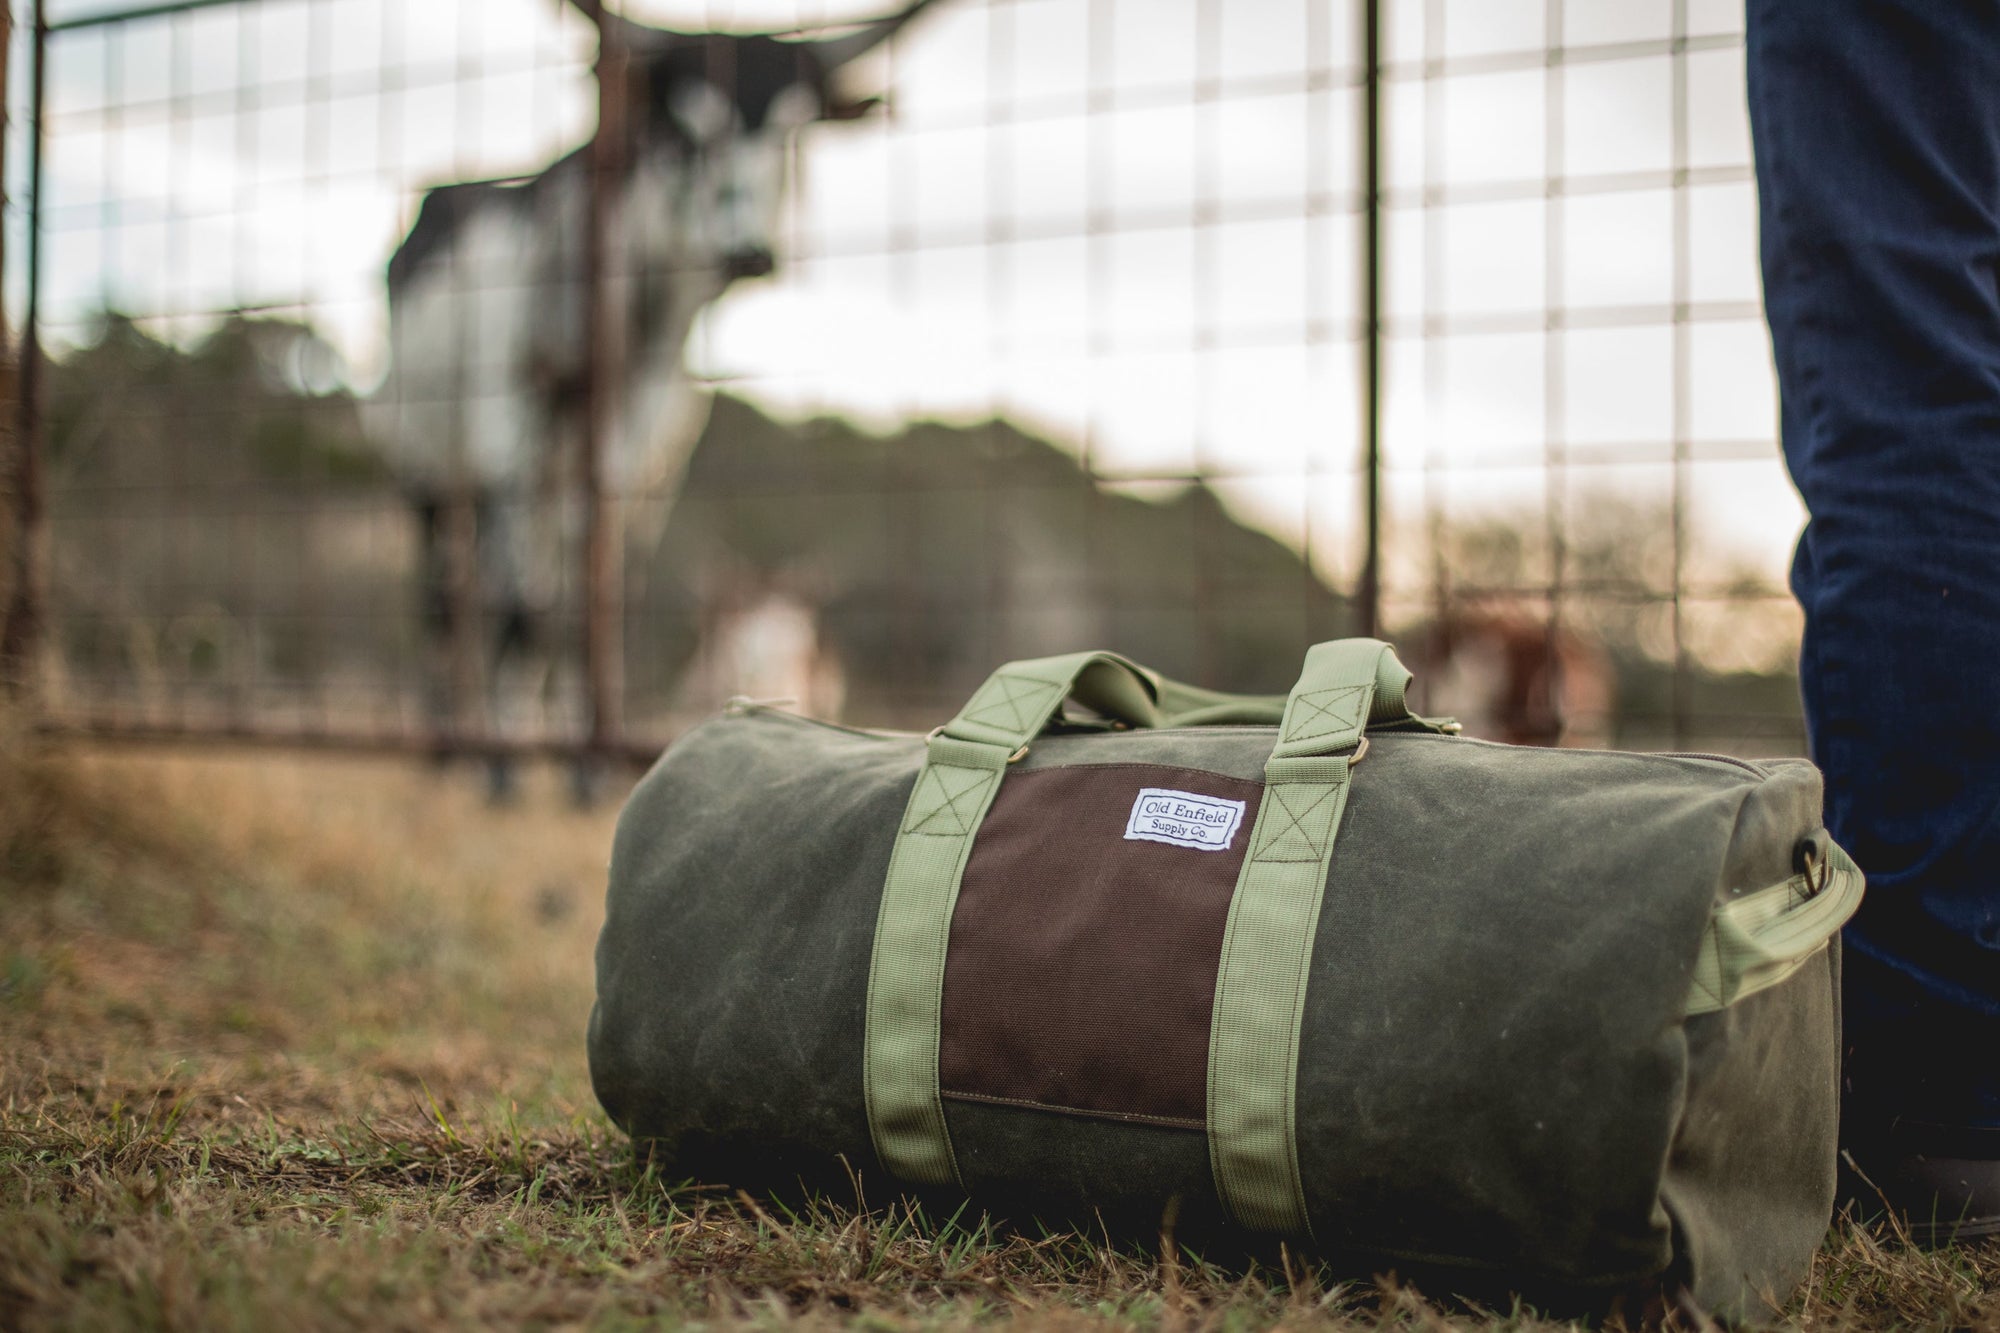 Waxed Canvas Duffle Bags, Vintage Duffel Bags, Canvas Duffle Bags for sale, made in America, Old Enfield Supply Co. 